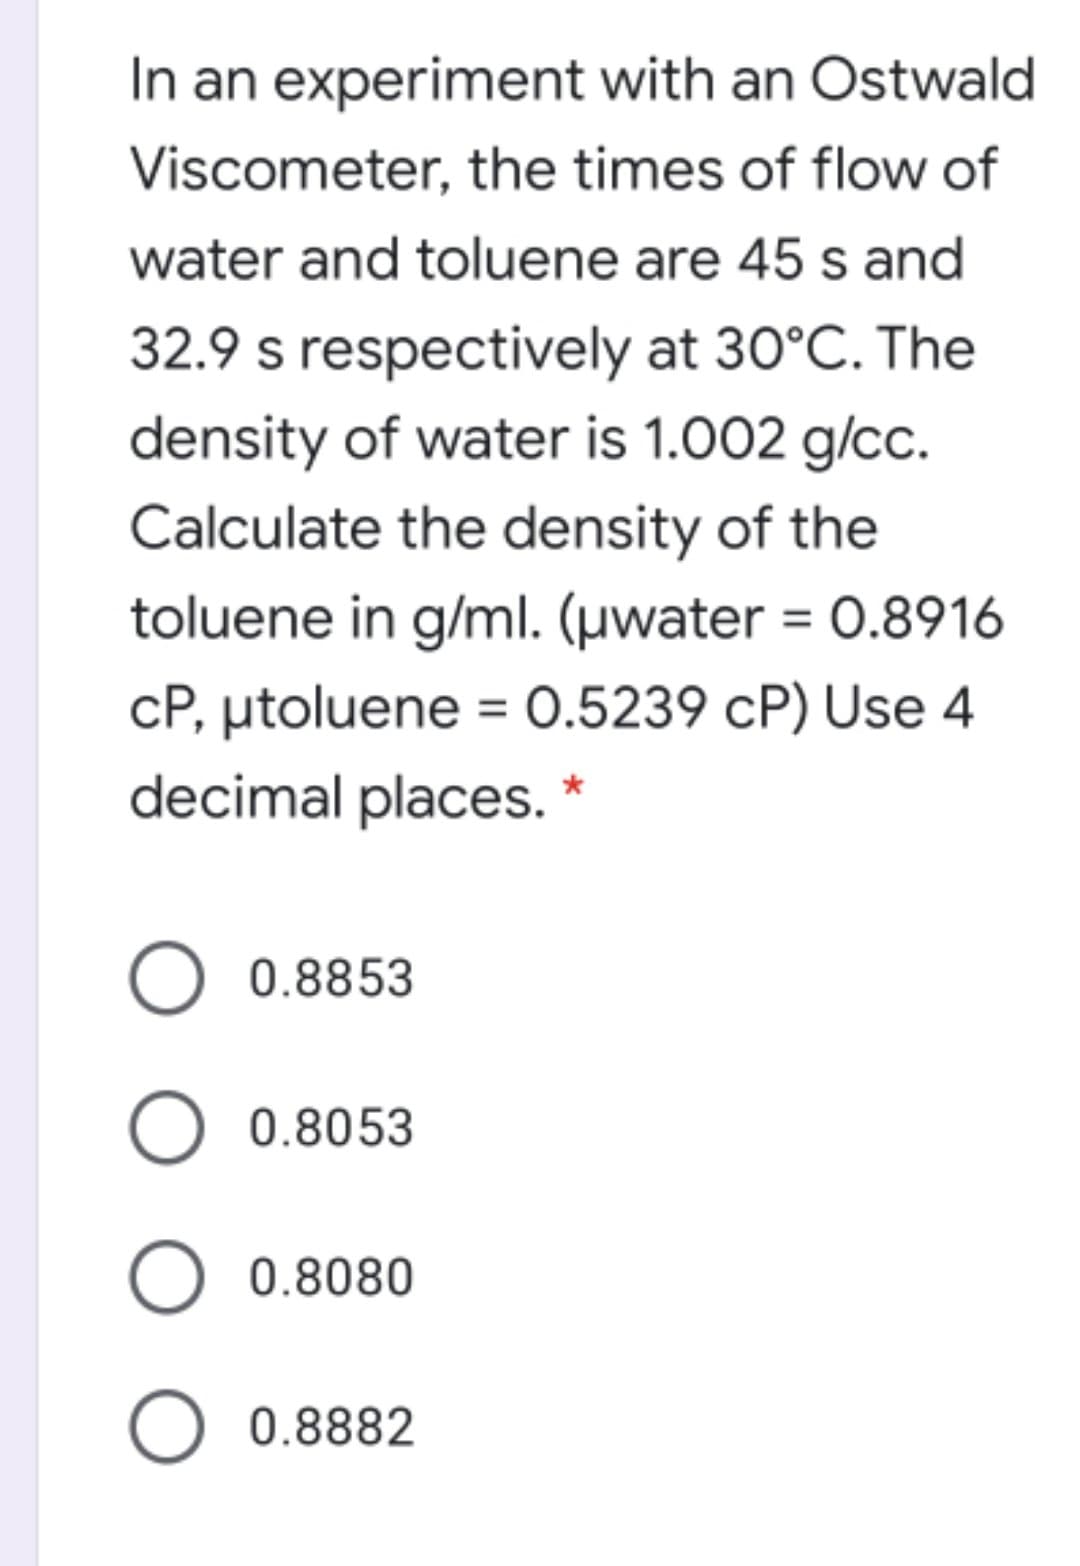 In an experiment with an Ostwald
Viscometer, the times of flow of
water and toluene are 45 s and
32.9 s respectively at 30°C. The
density of water is 1.002 g/cc.
Calculate the density of the
toluene in g/ml. (µwater = 0.8916
%3D
cP, utoluene = 0.5239 cP) Use 4
decimal places.
0.8853
0.8053
O 0.8080
O 0.8882
